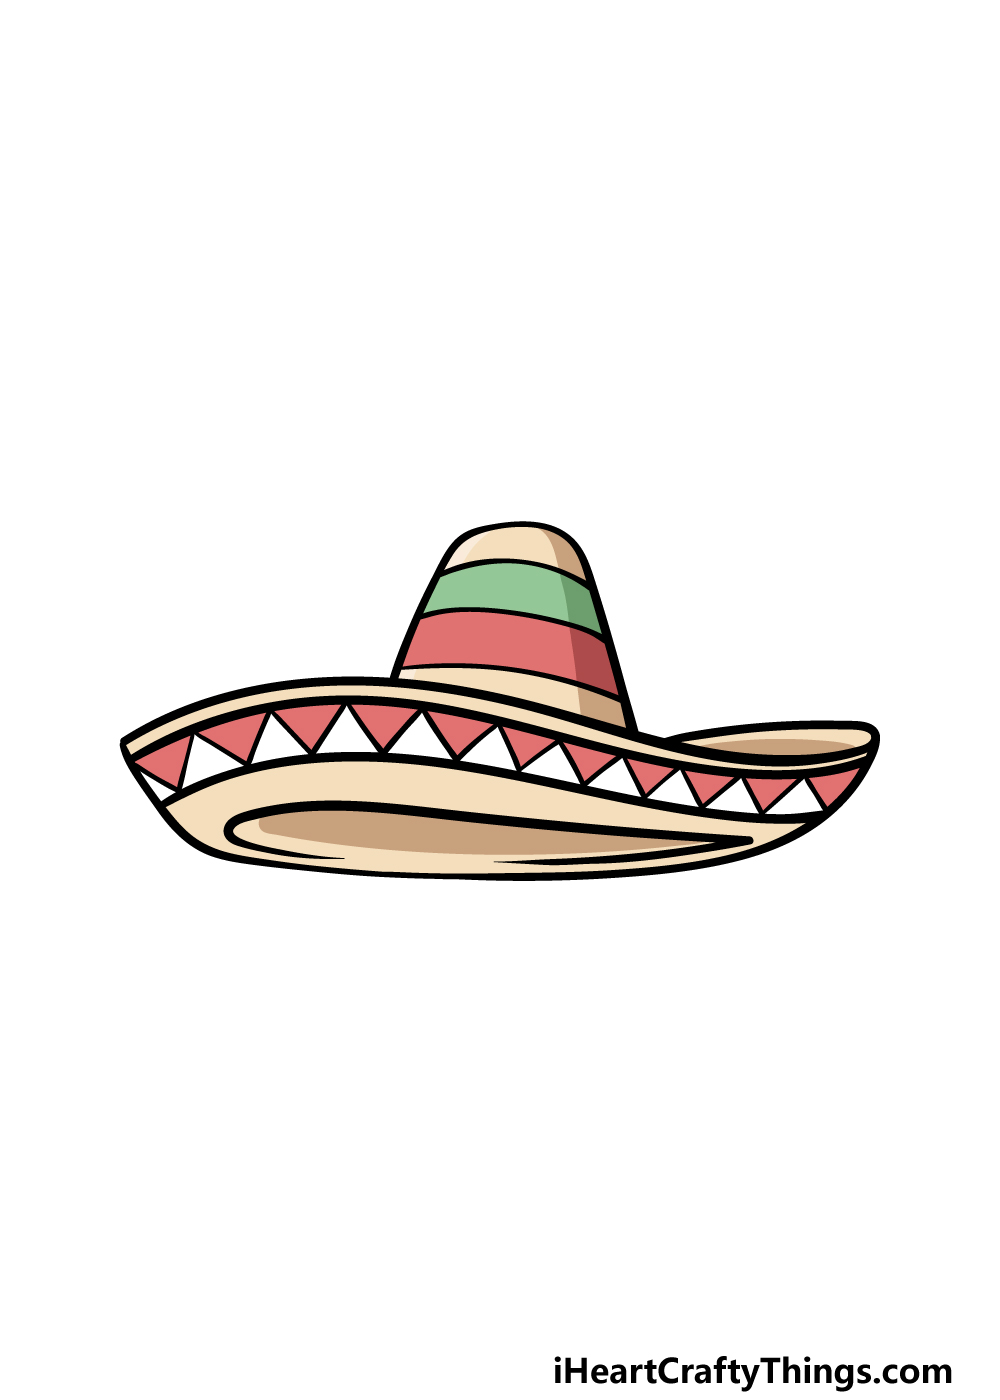 Sombrero Drawing - How To Draw A Step By Step